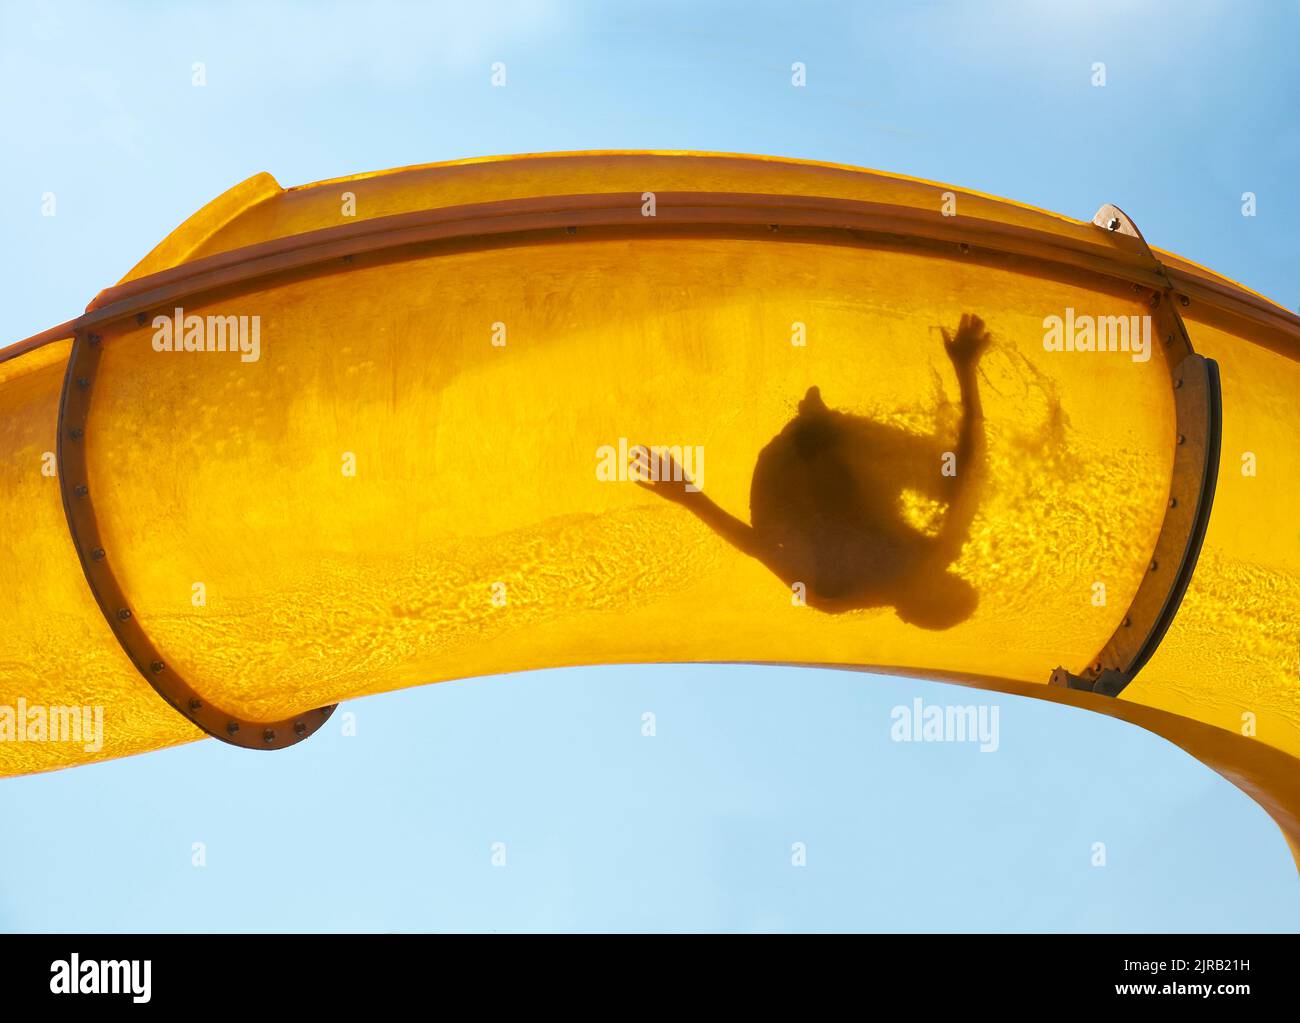 Silhouette of person sliding down water slide Stock Photo